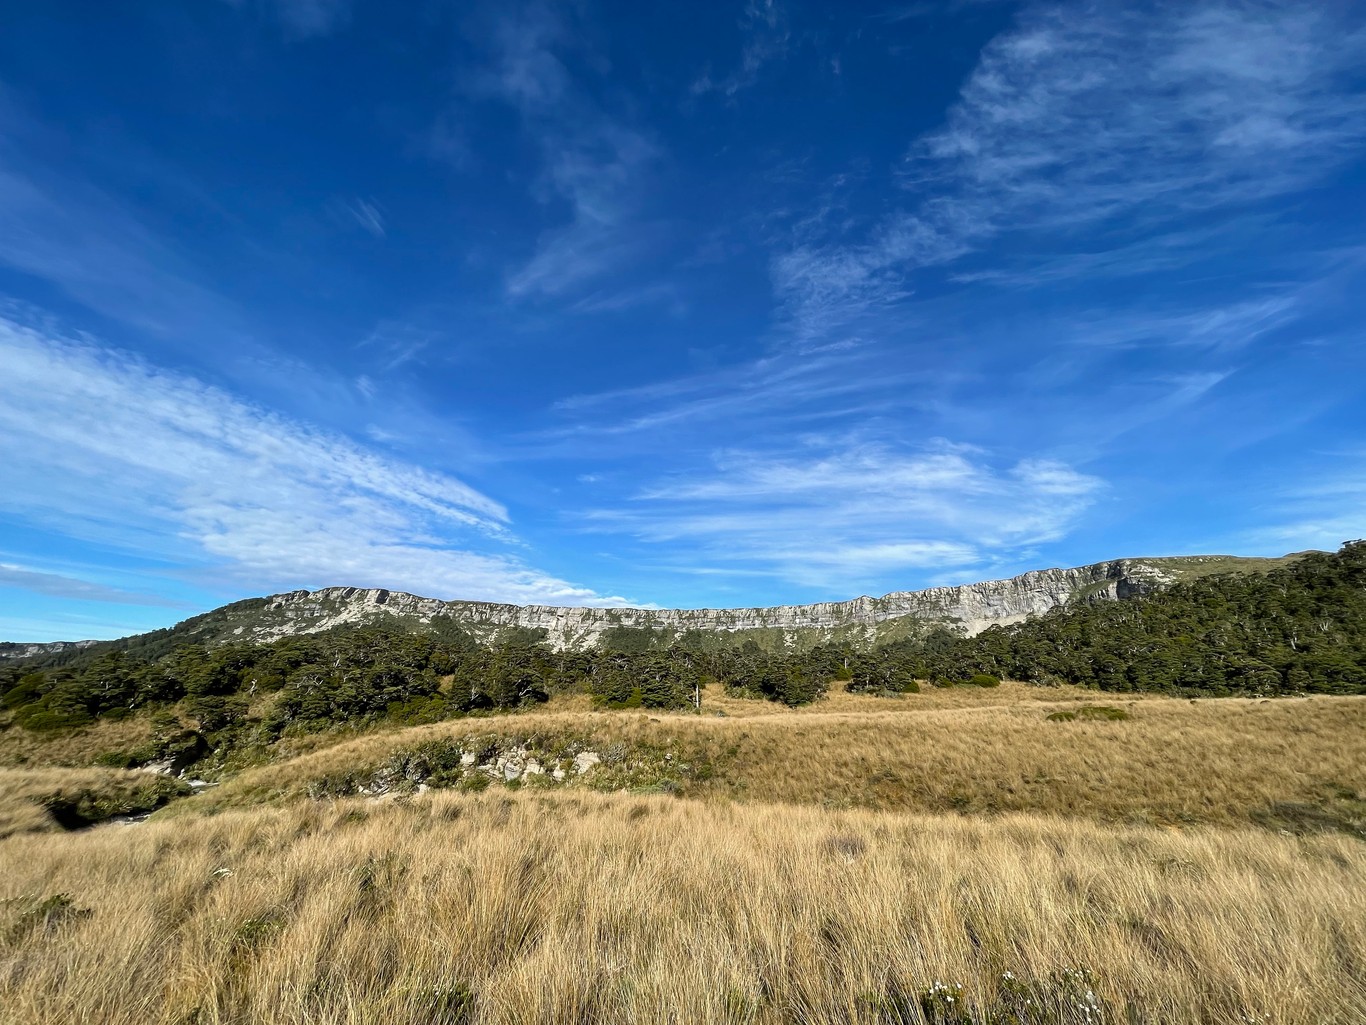 A rocky cliff on the edge of a plateau, framed by tussocks and blue sky